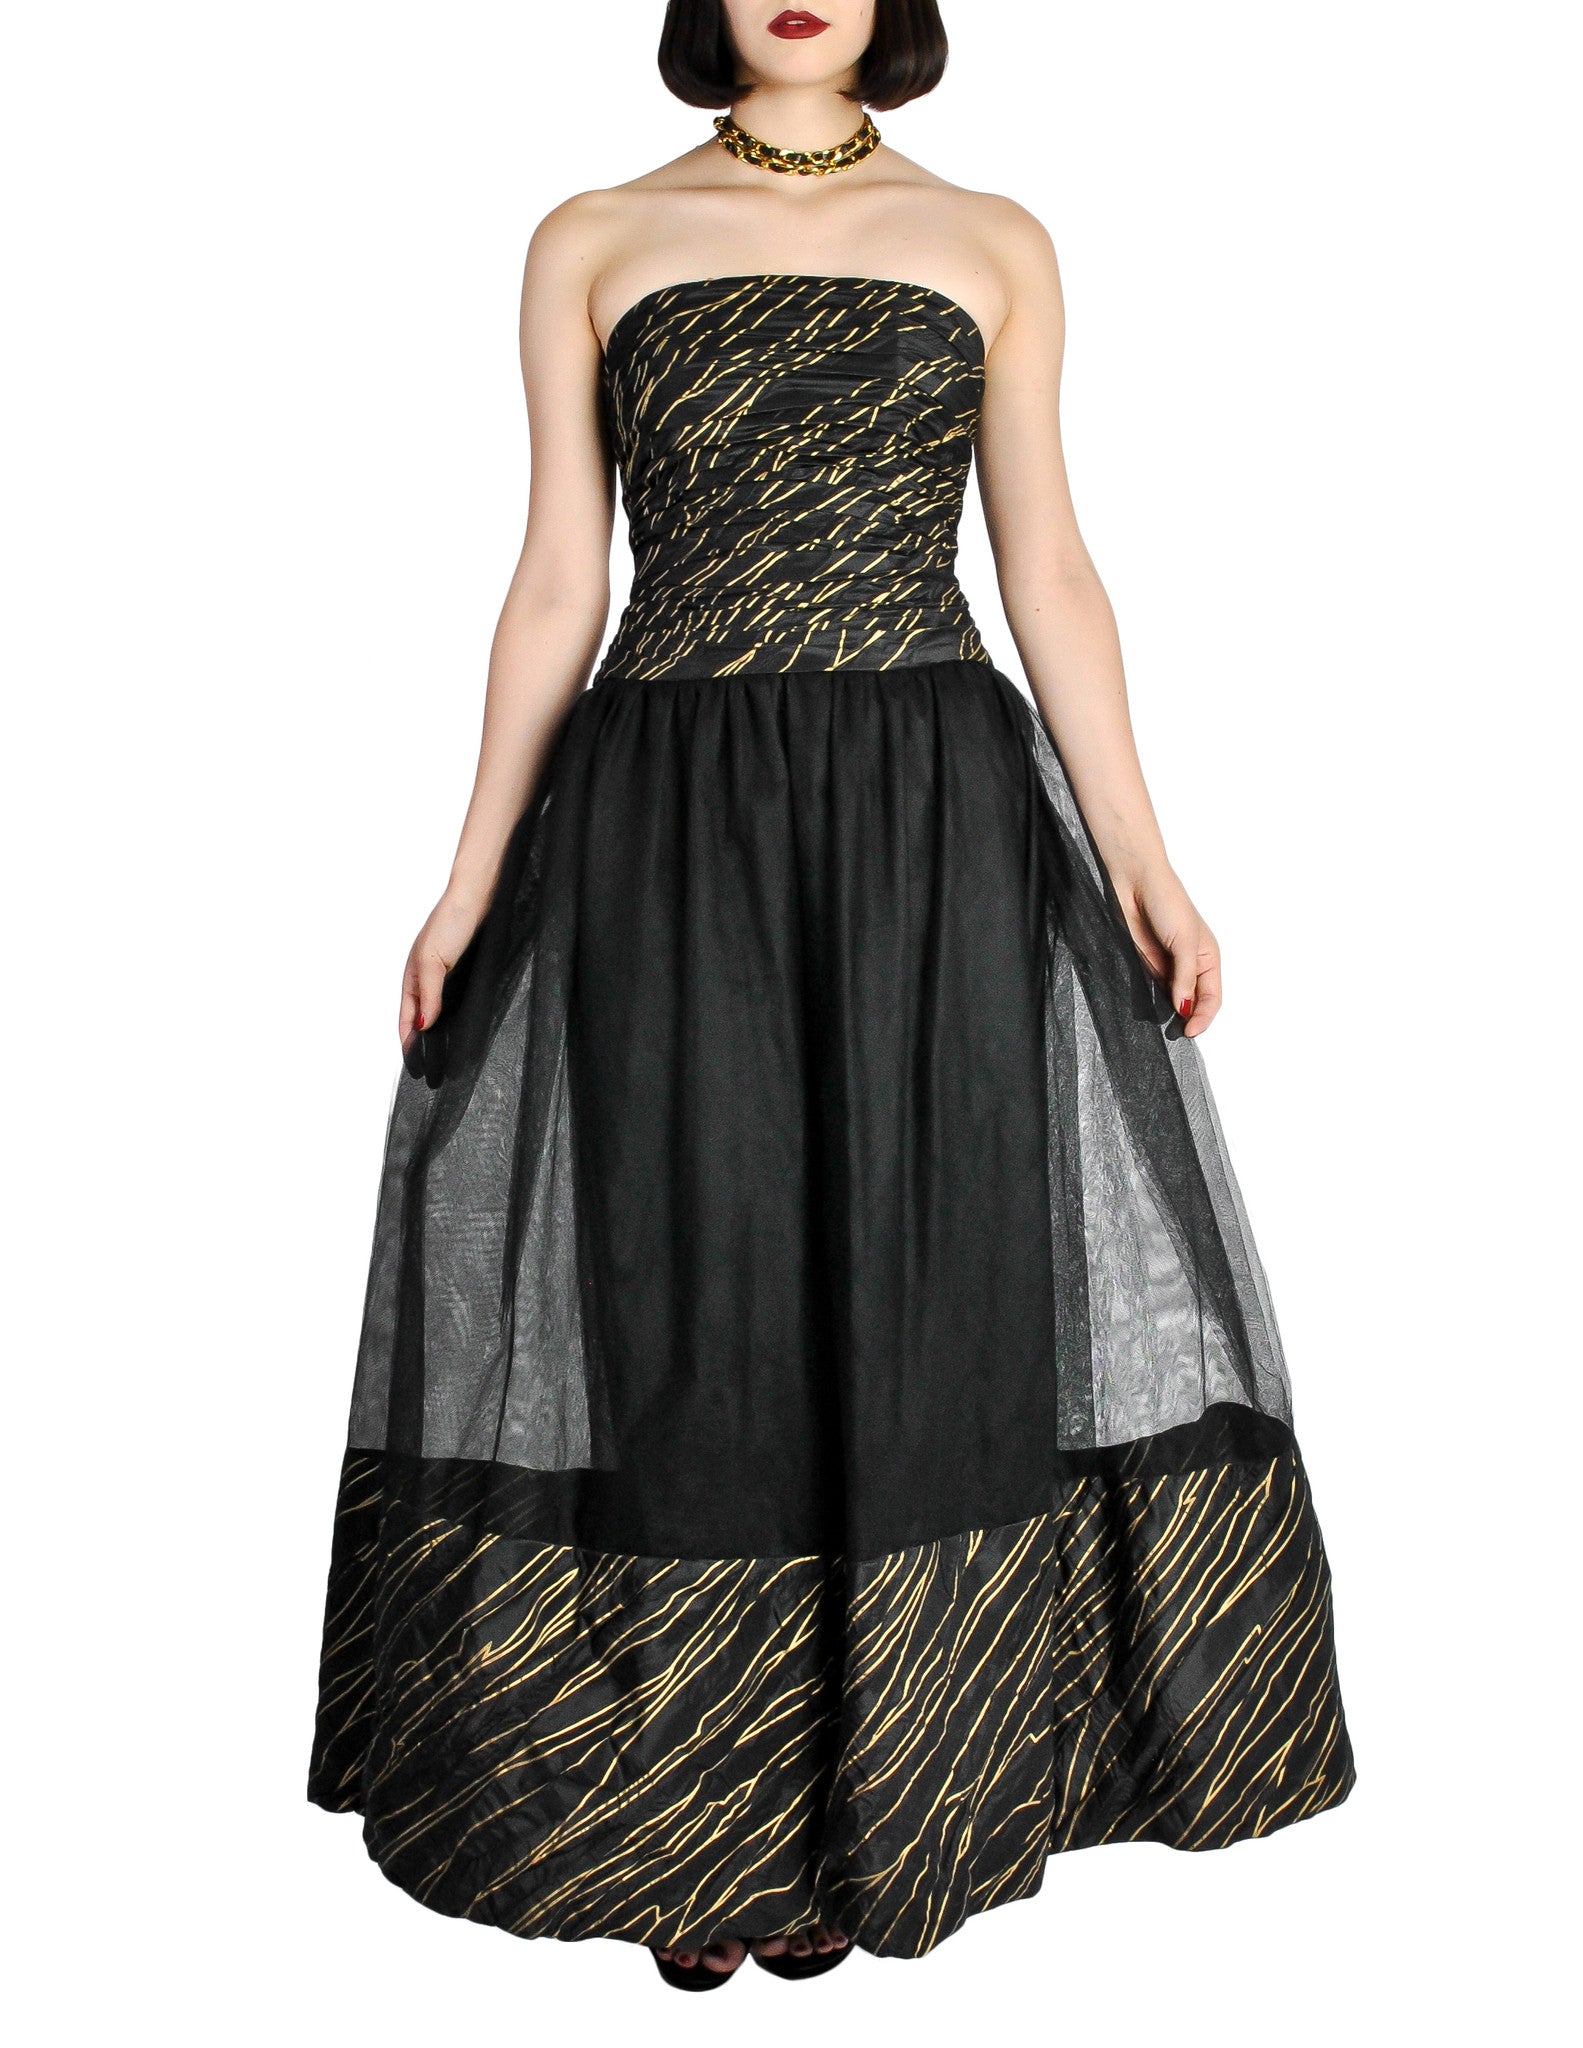 Chanel Vintage Black & Gold Silk & Tulle Evening Gown - from Amarcord